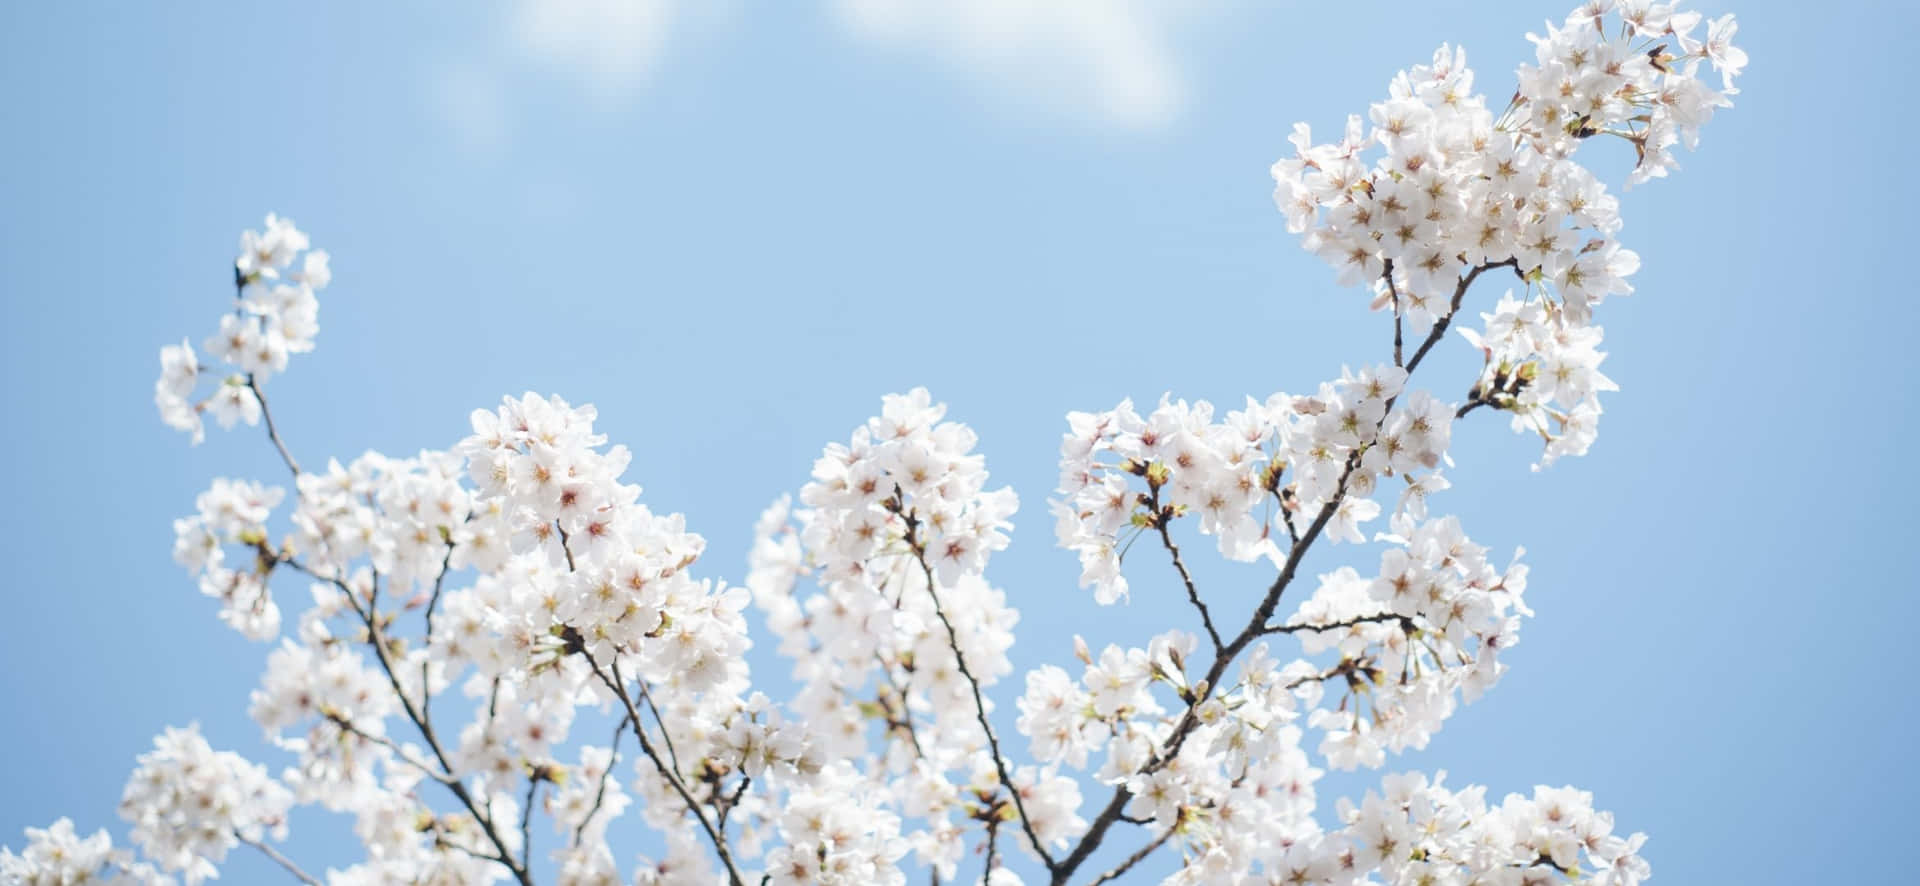 White Flowers On A Branch Against A Blue Sky Wallpaper